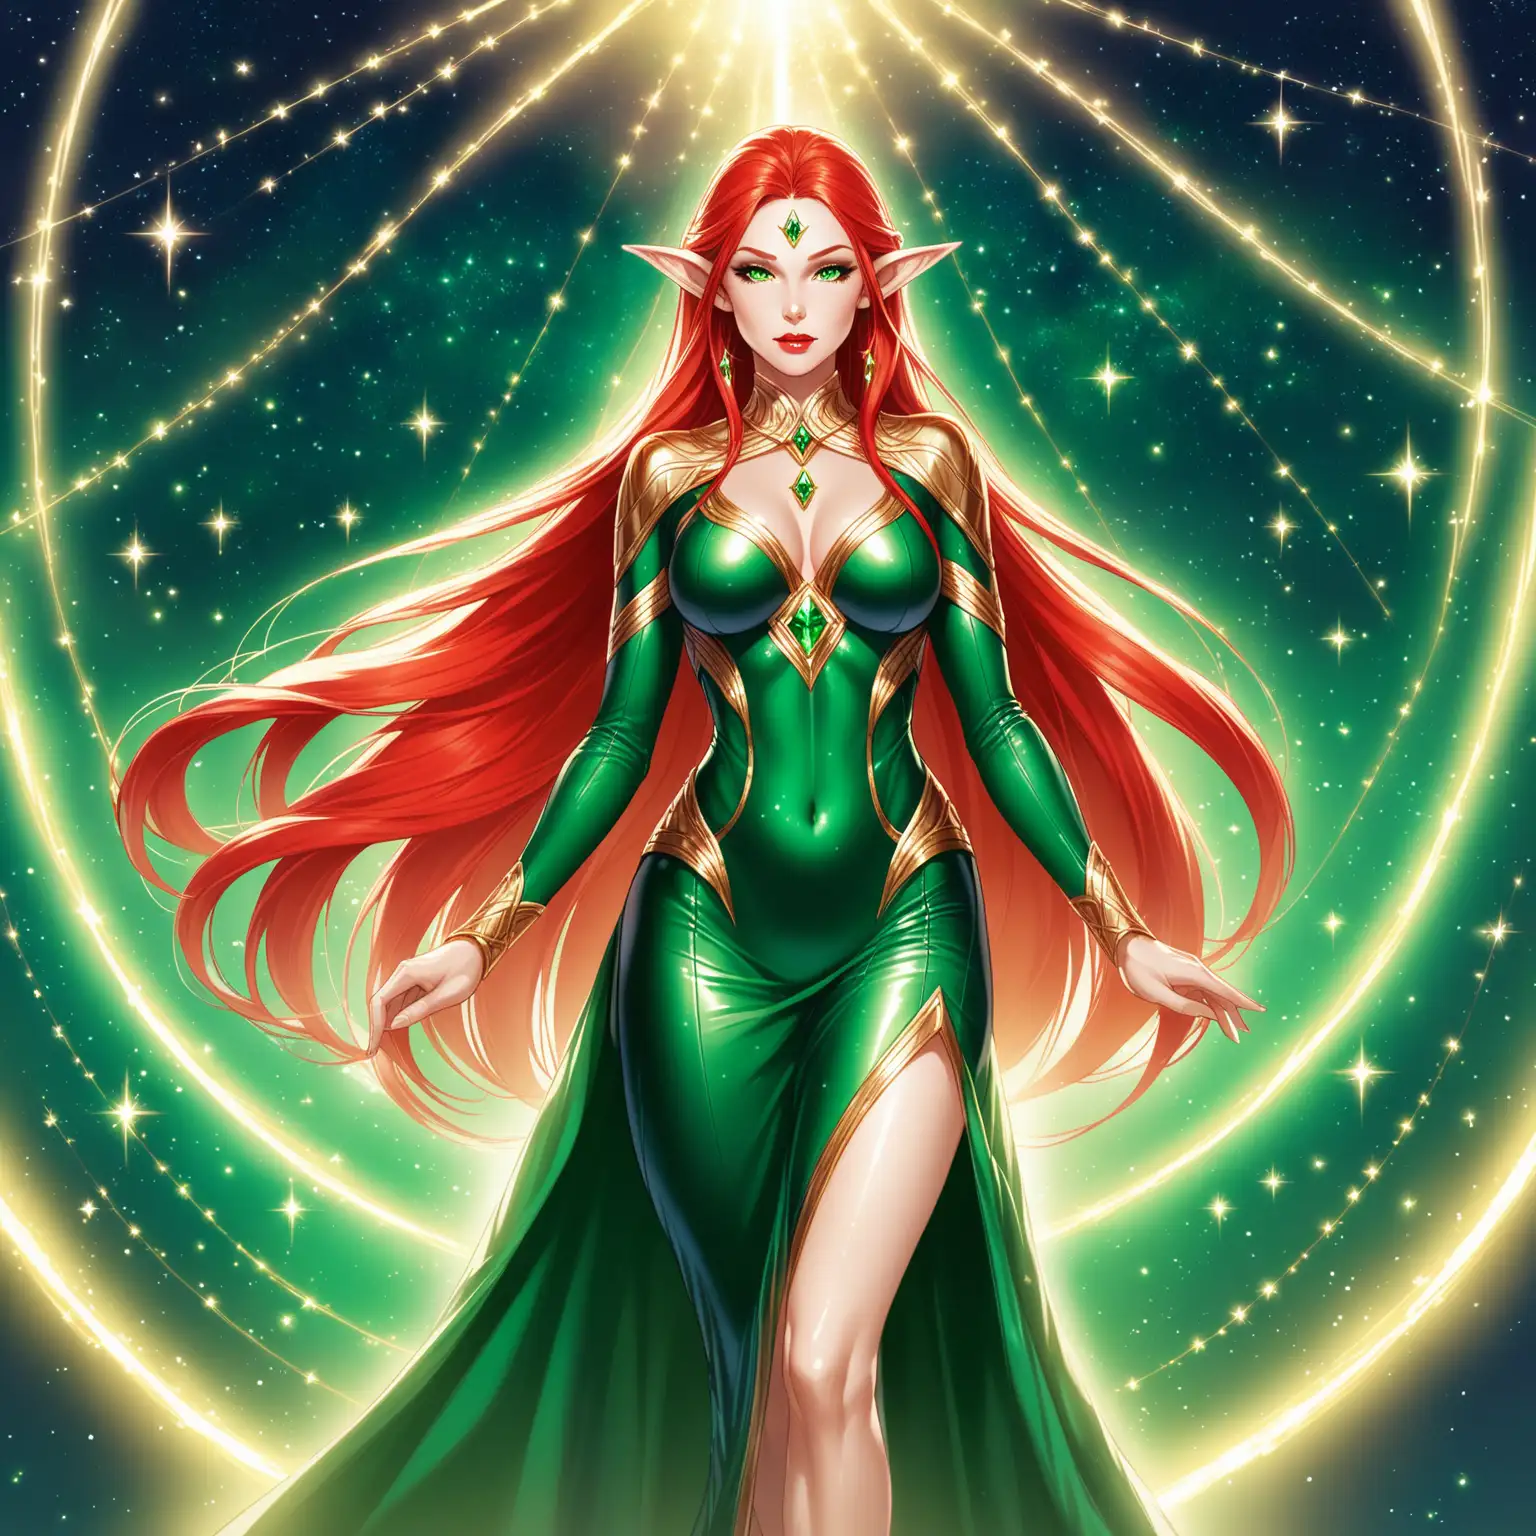 Elegant Elven Goddess in Ethereal Realm Warrior Elf with Emerald Jewelry